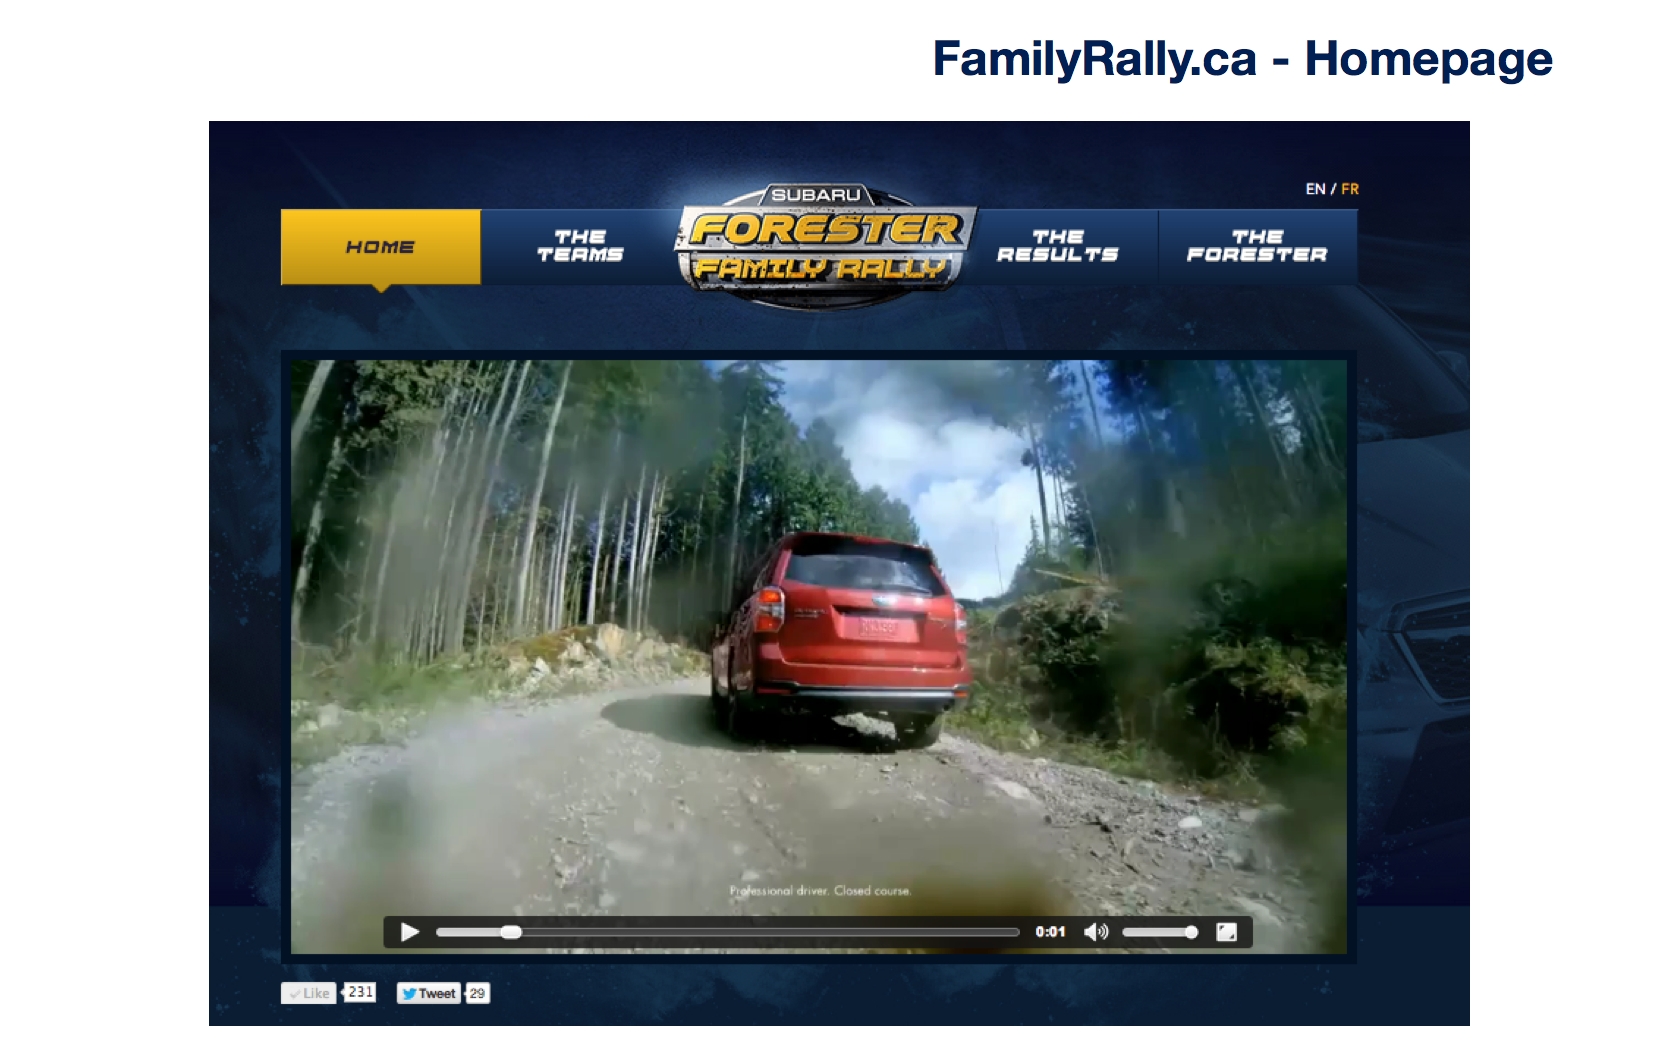 12325_Cassies_-_Subaru_Forester_Family_Rally_Creative_Elements.006